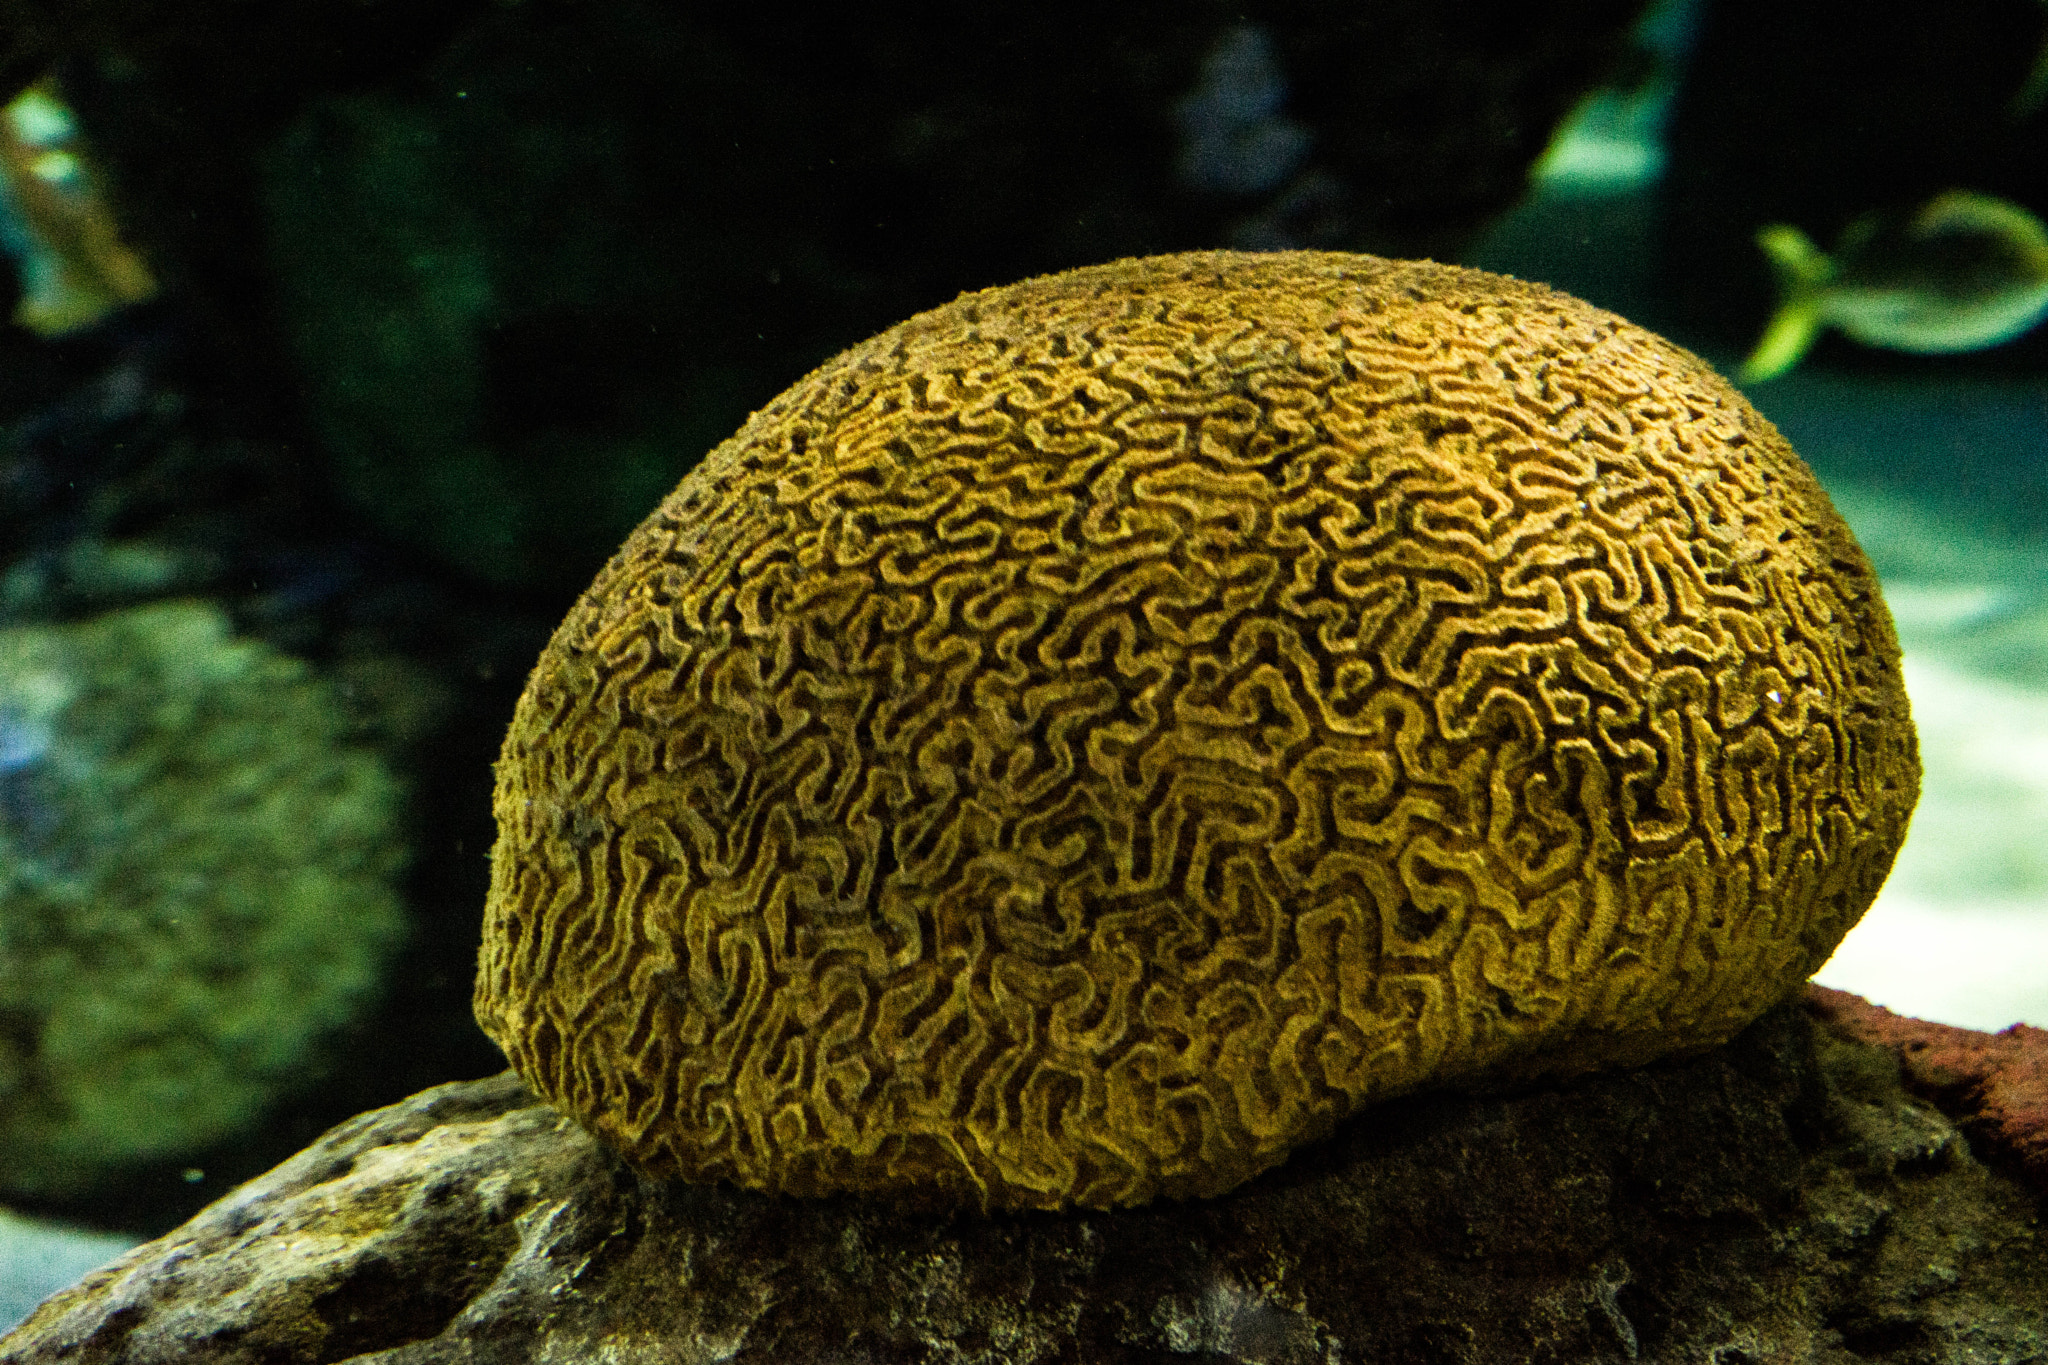 Sony a7 II + Sony FE 70-300mm F4.5-5.6 G OSS sample photo. Brain coral - also called anthozoa or "flow photography